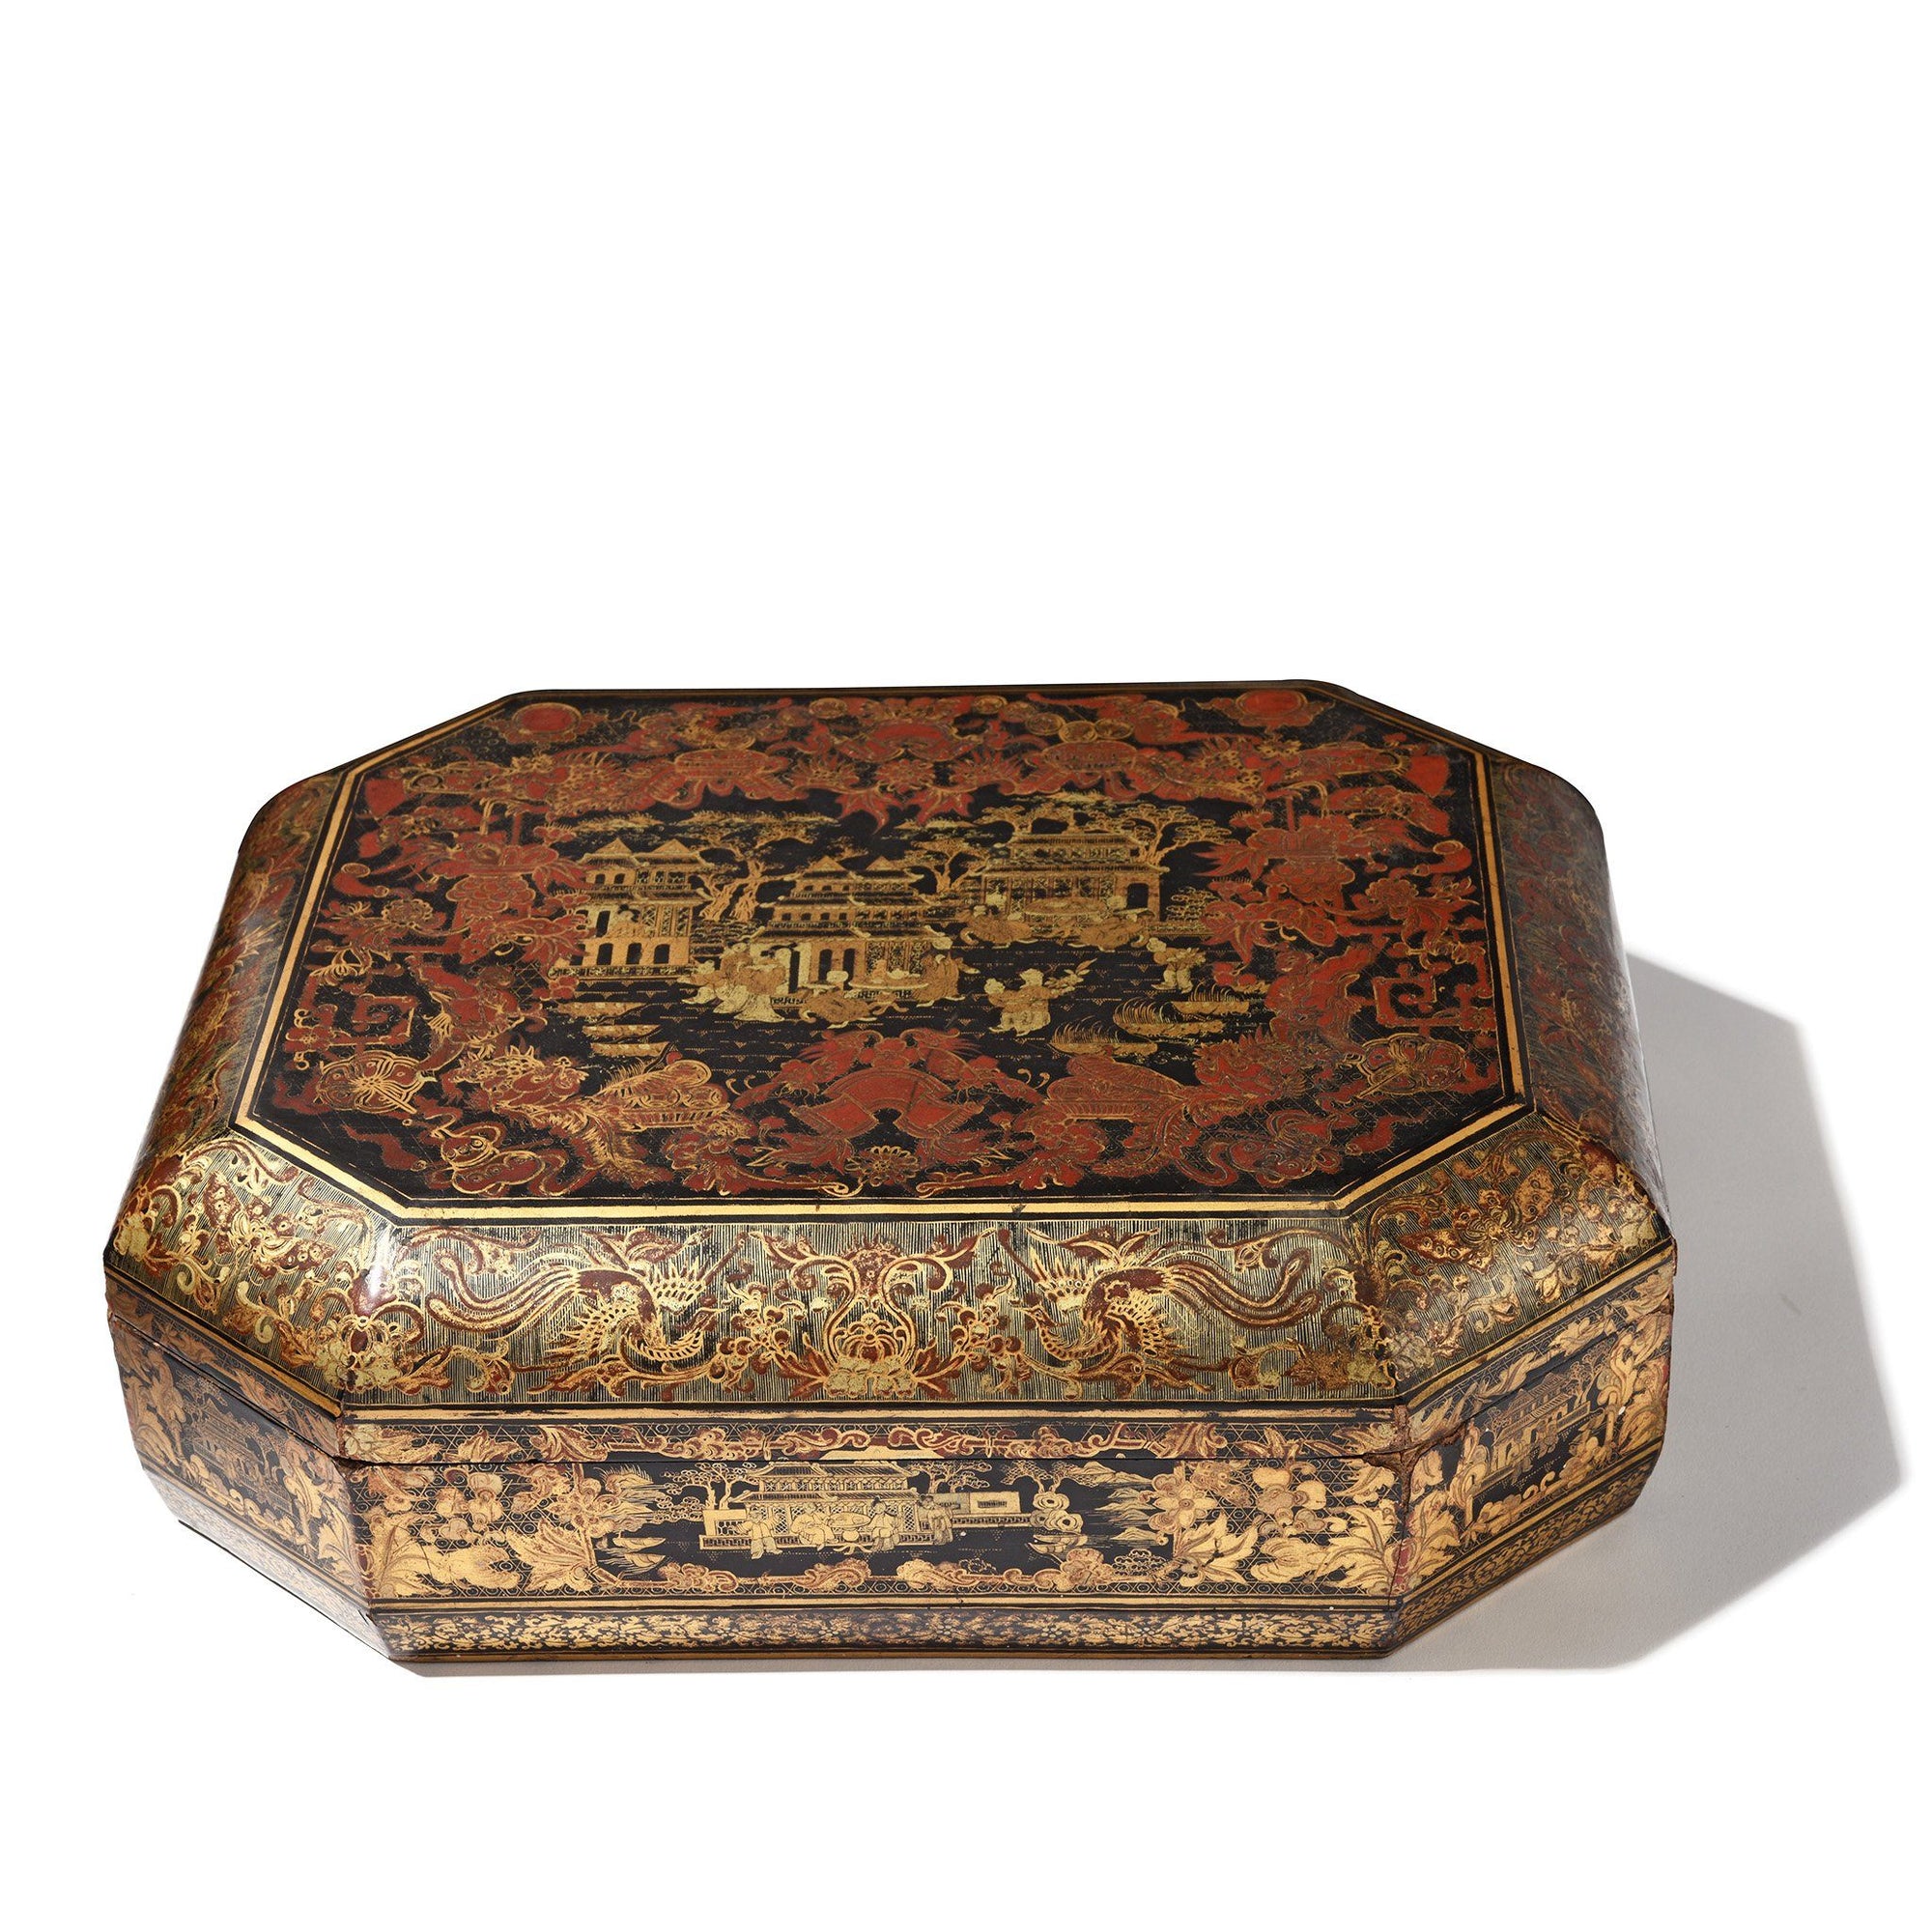 Export Lacquer Games Box - Qing Dynasty Early 19thC - 38 x 31 x 12 cm - M232